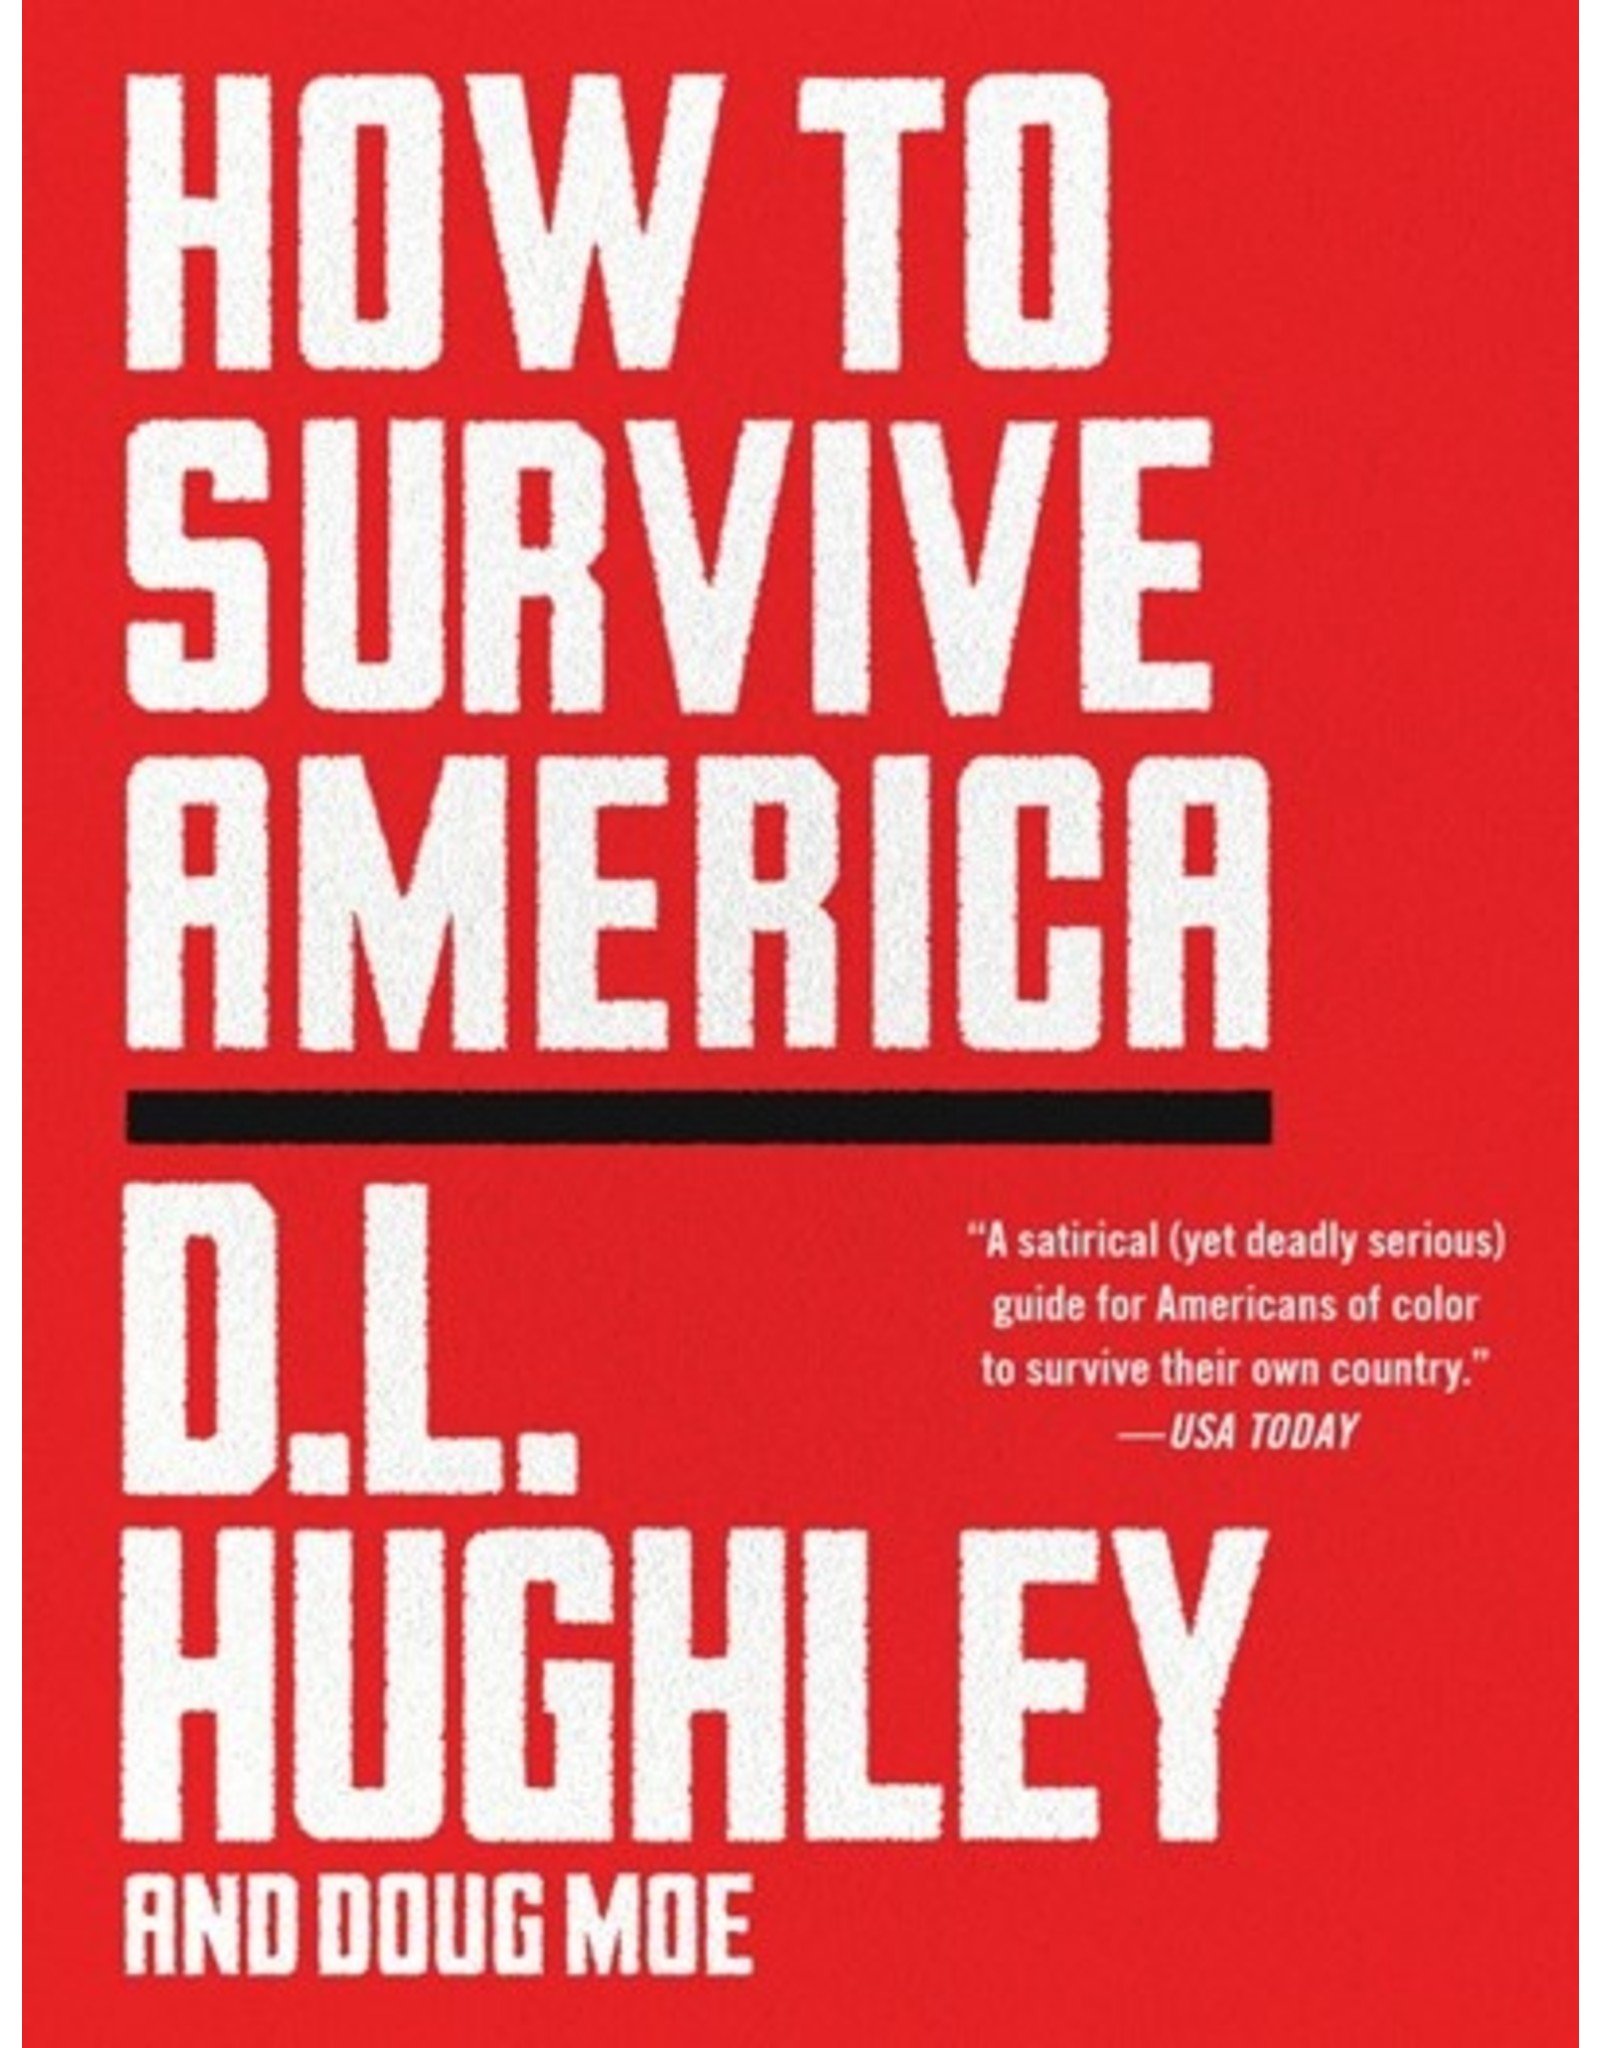 Books How to Survive America by D.L. Hughley and Doug Moe